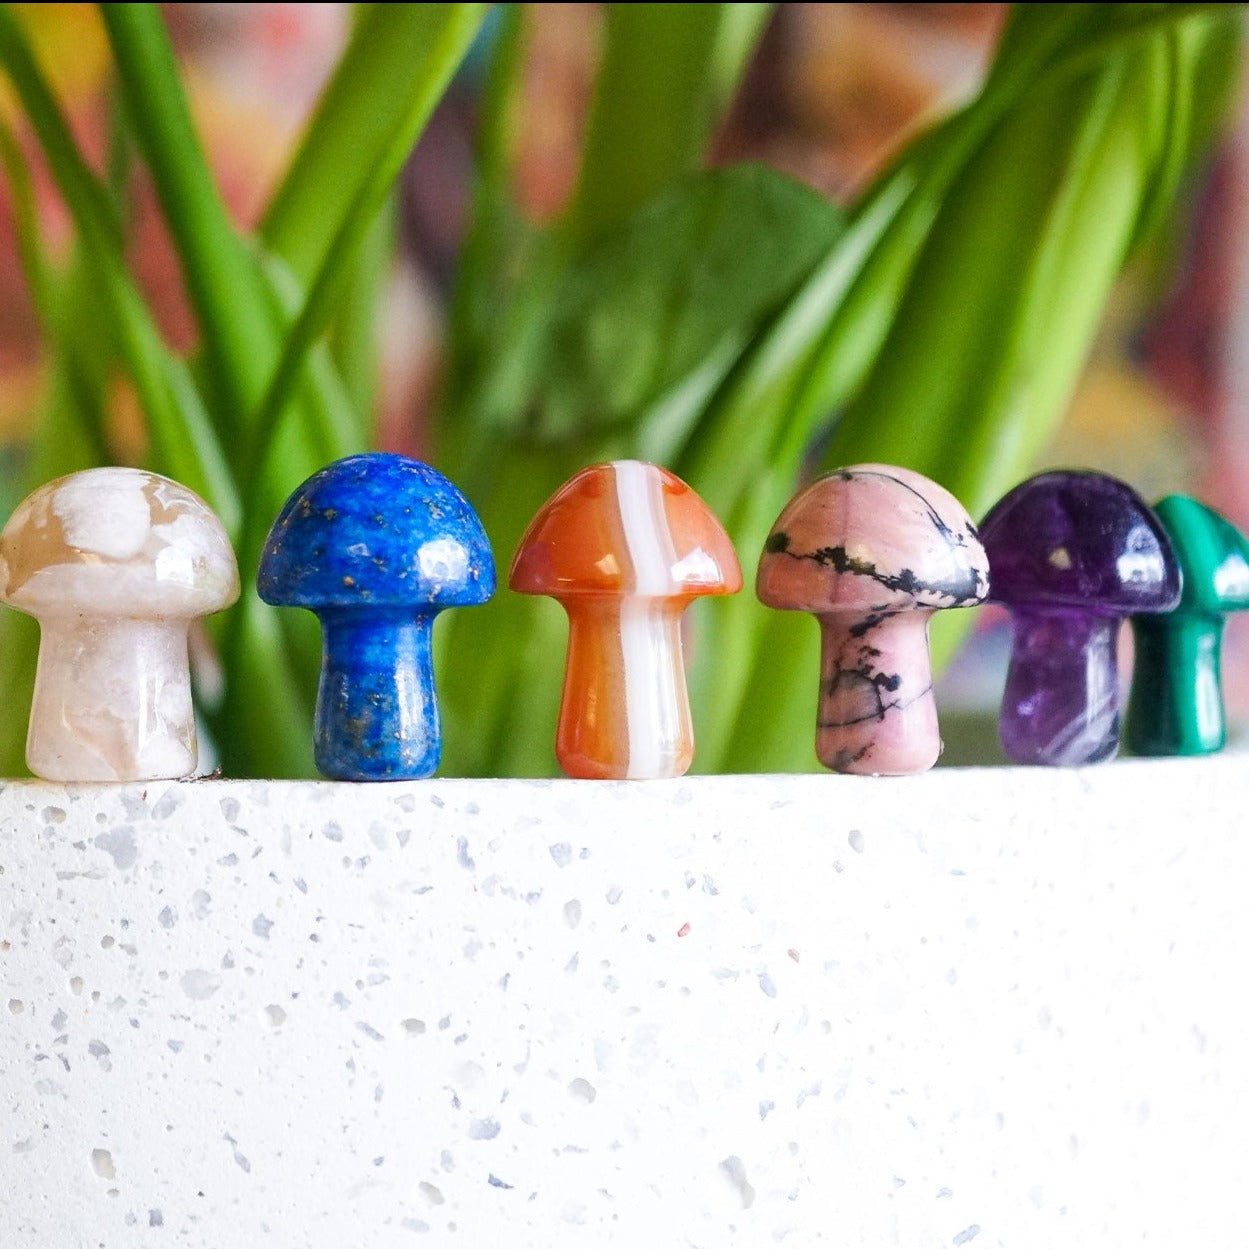 collection of 9 mini mushroom figurines created from natural crystals by Energy Muse